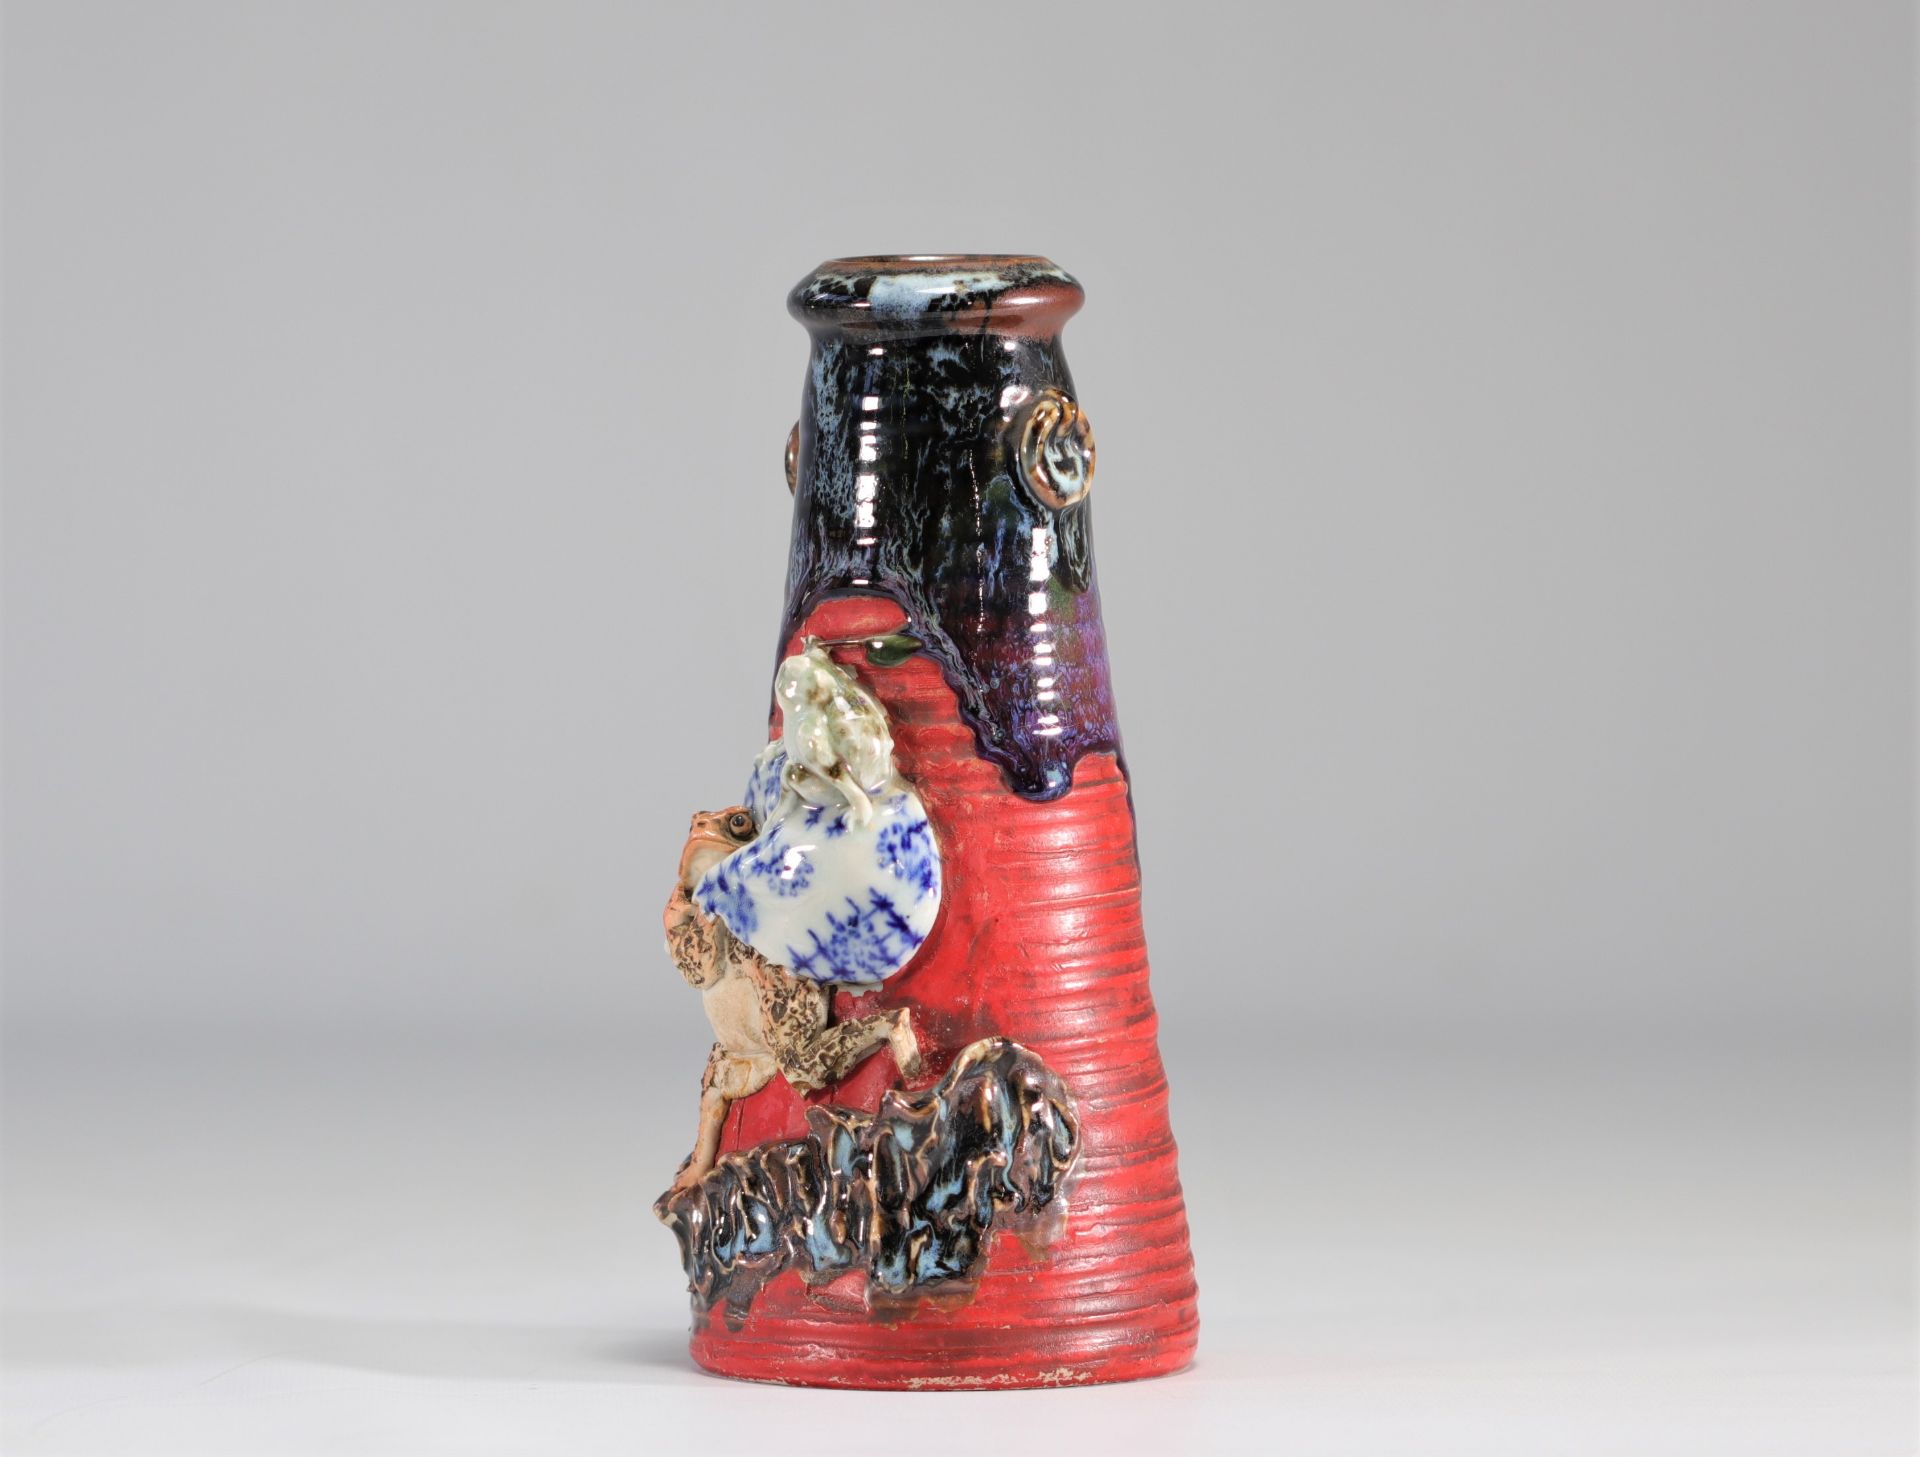 Sumida-Gawa ceramic vase decorated with toads from Japan from 19th century - Image 2 of 6